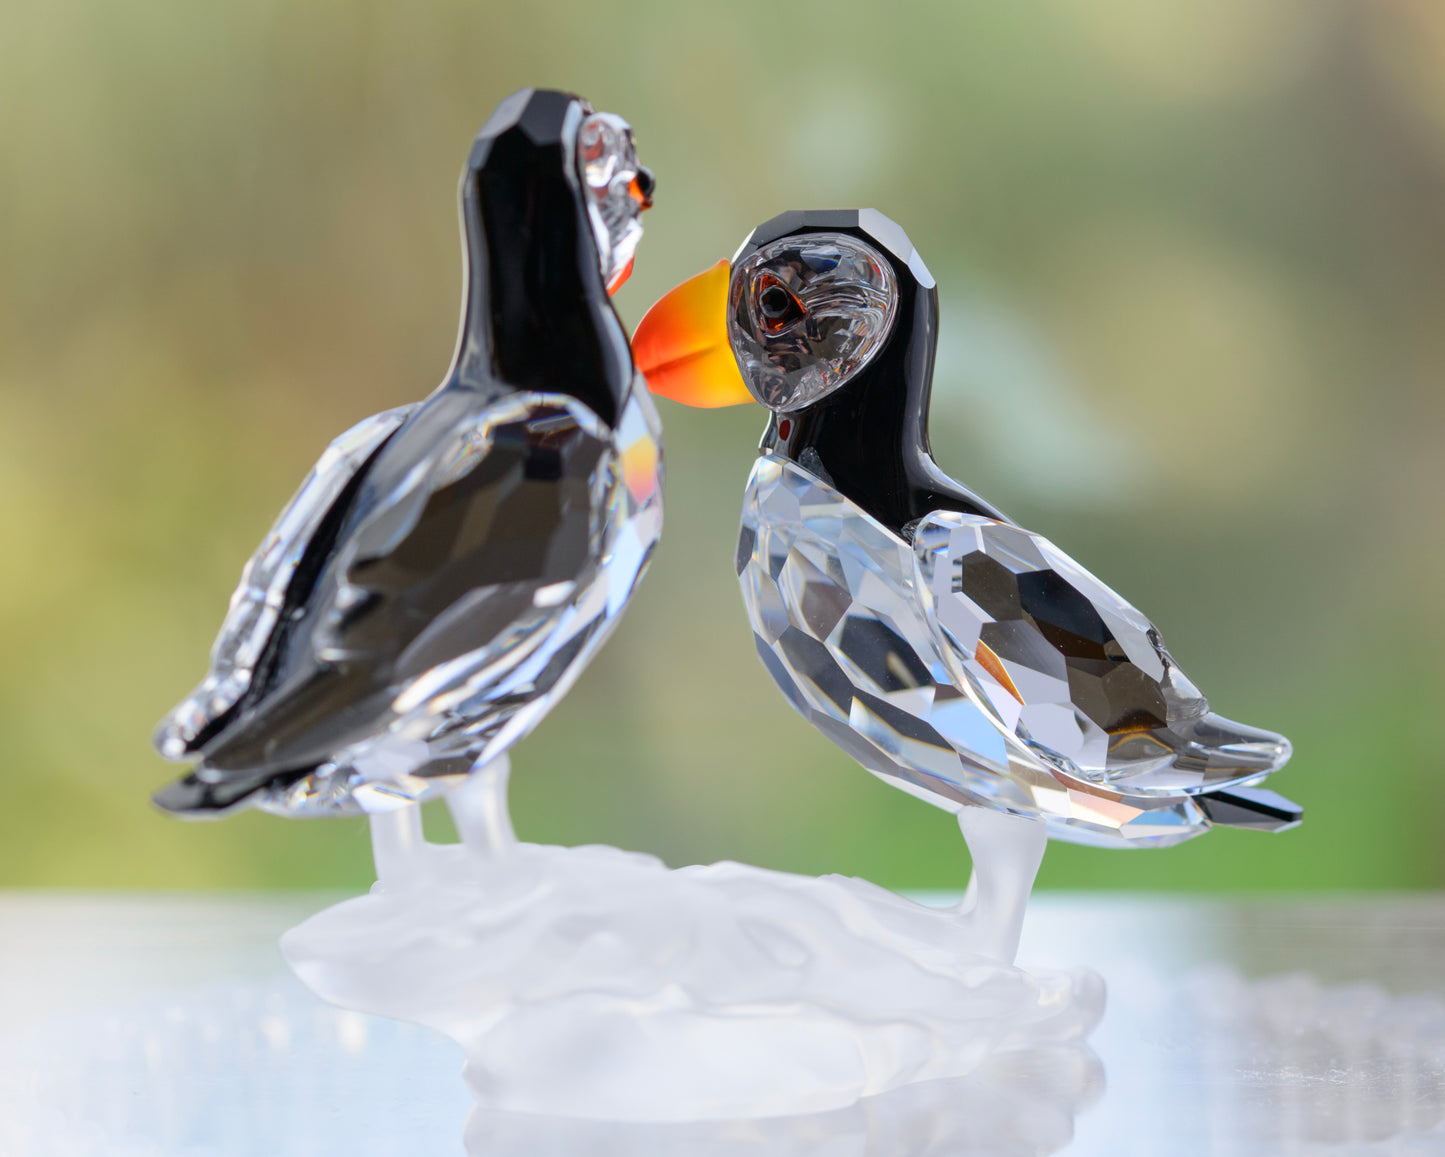 Genuine Swarovski Crystal Glass Puffins On Frosted Rock Figure 261643 (A1660G)